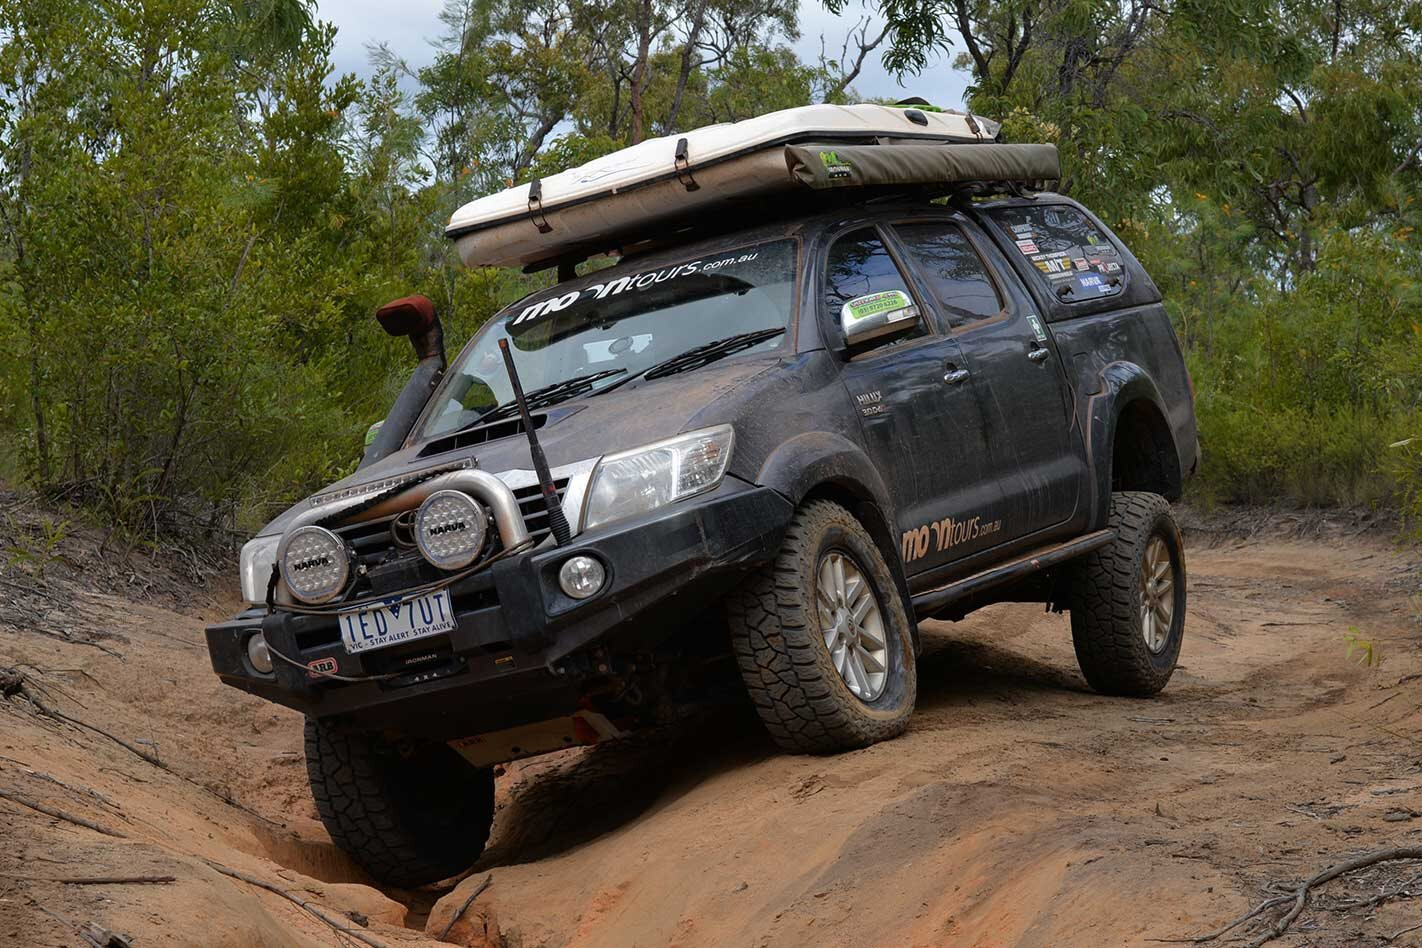 2015 Toyota Hilux in the 4x4 shed